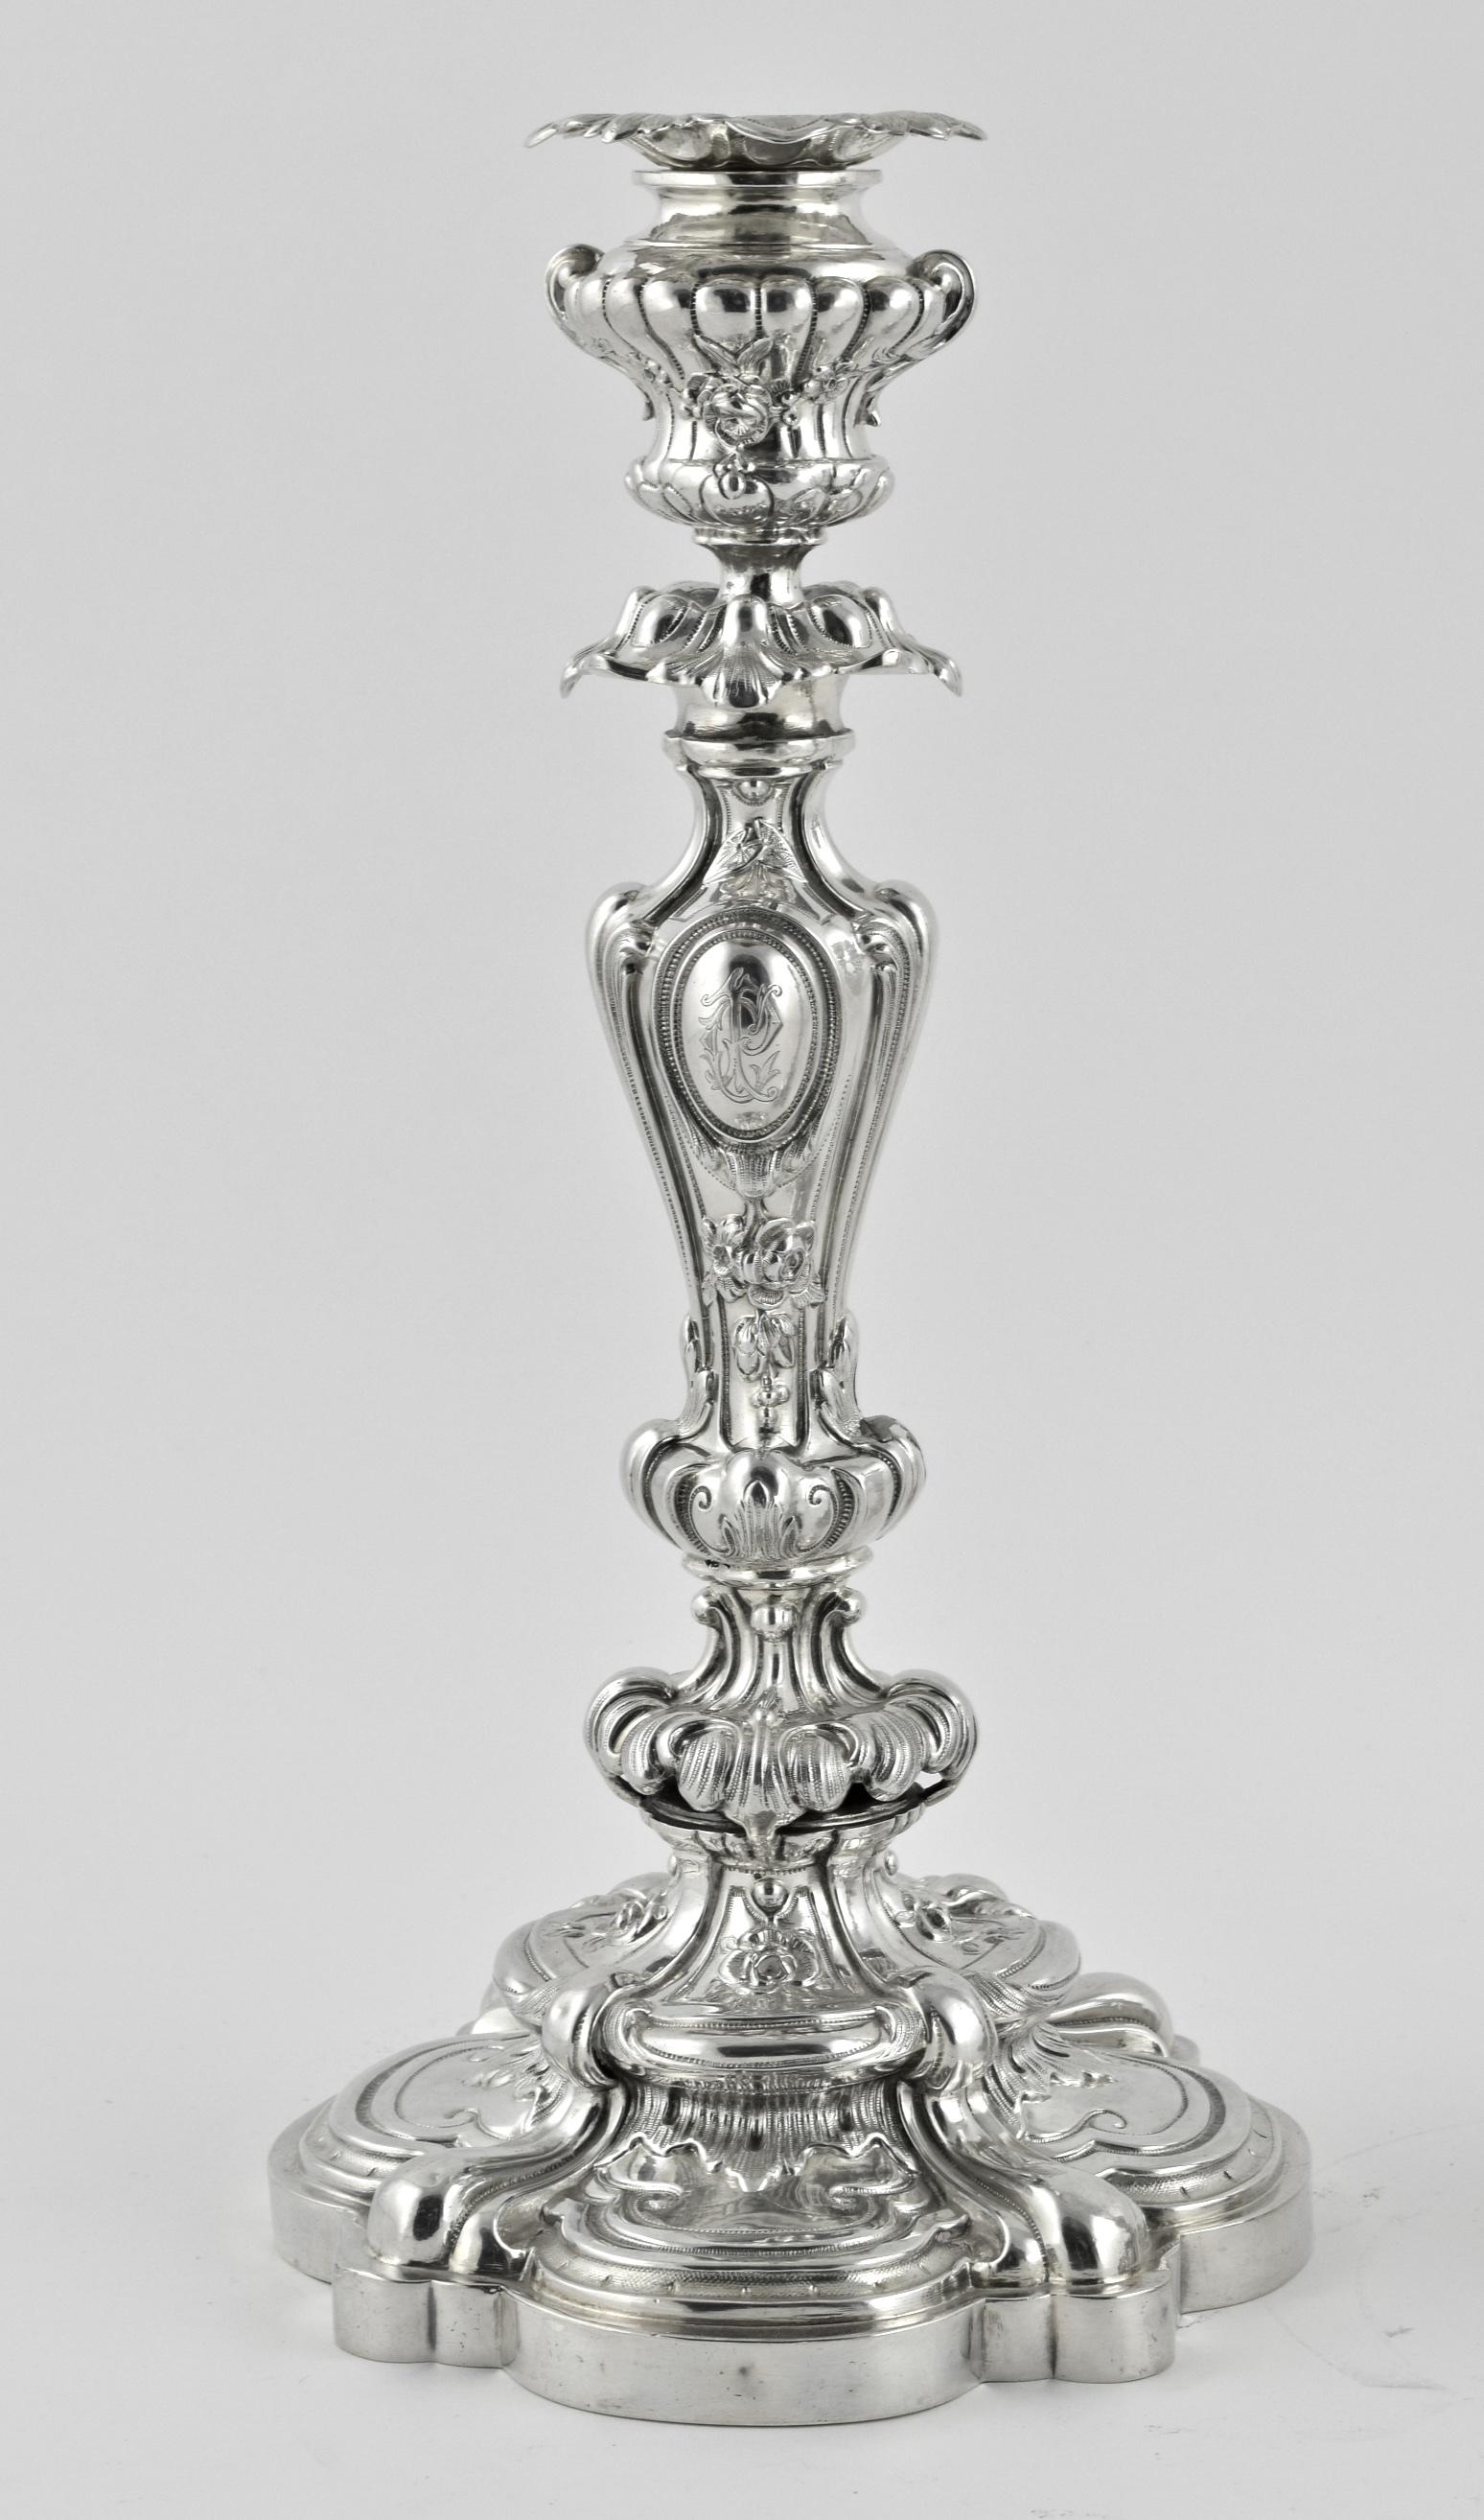 Heavily decorated with flowers and foliage, each engraved with an initial. Removable original nozzels. Minerva mark for French silver